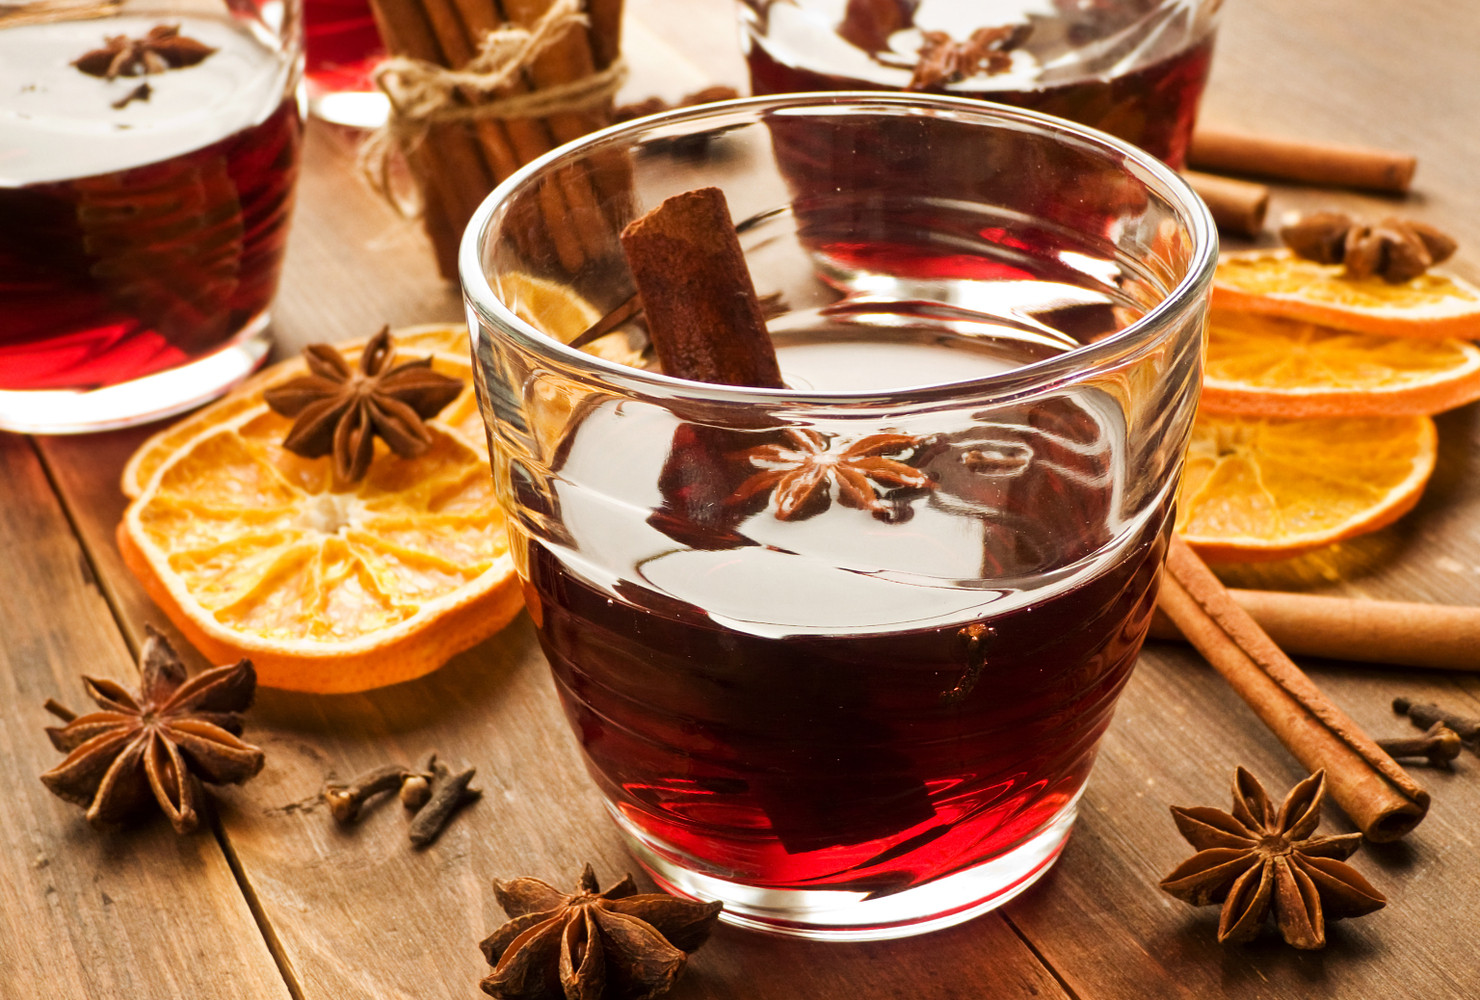 Unwind with this delicious vegan holiday cocktail recipe